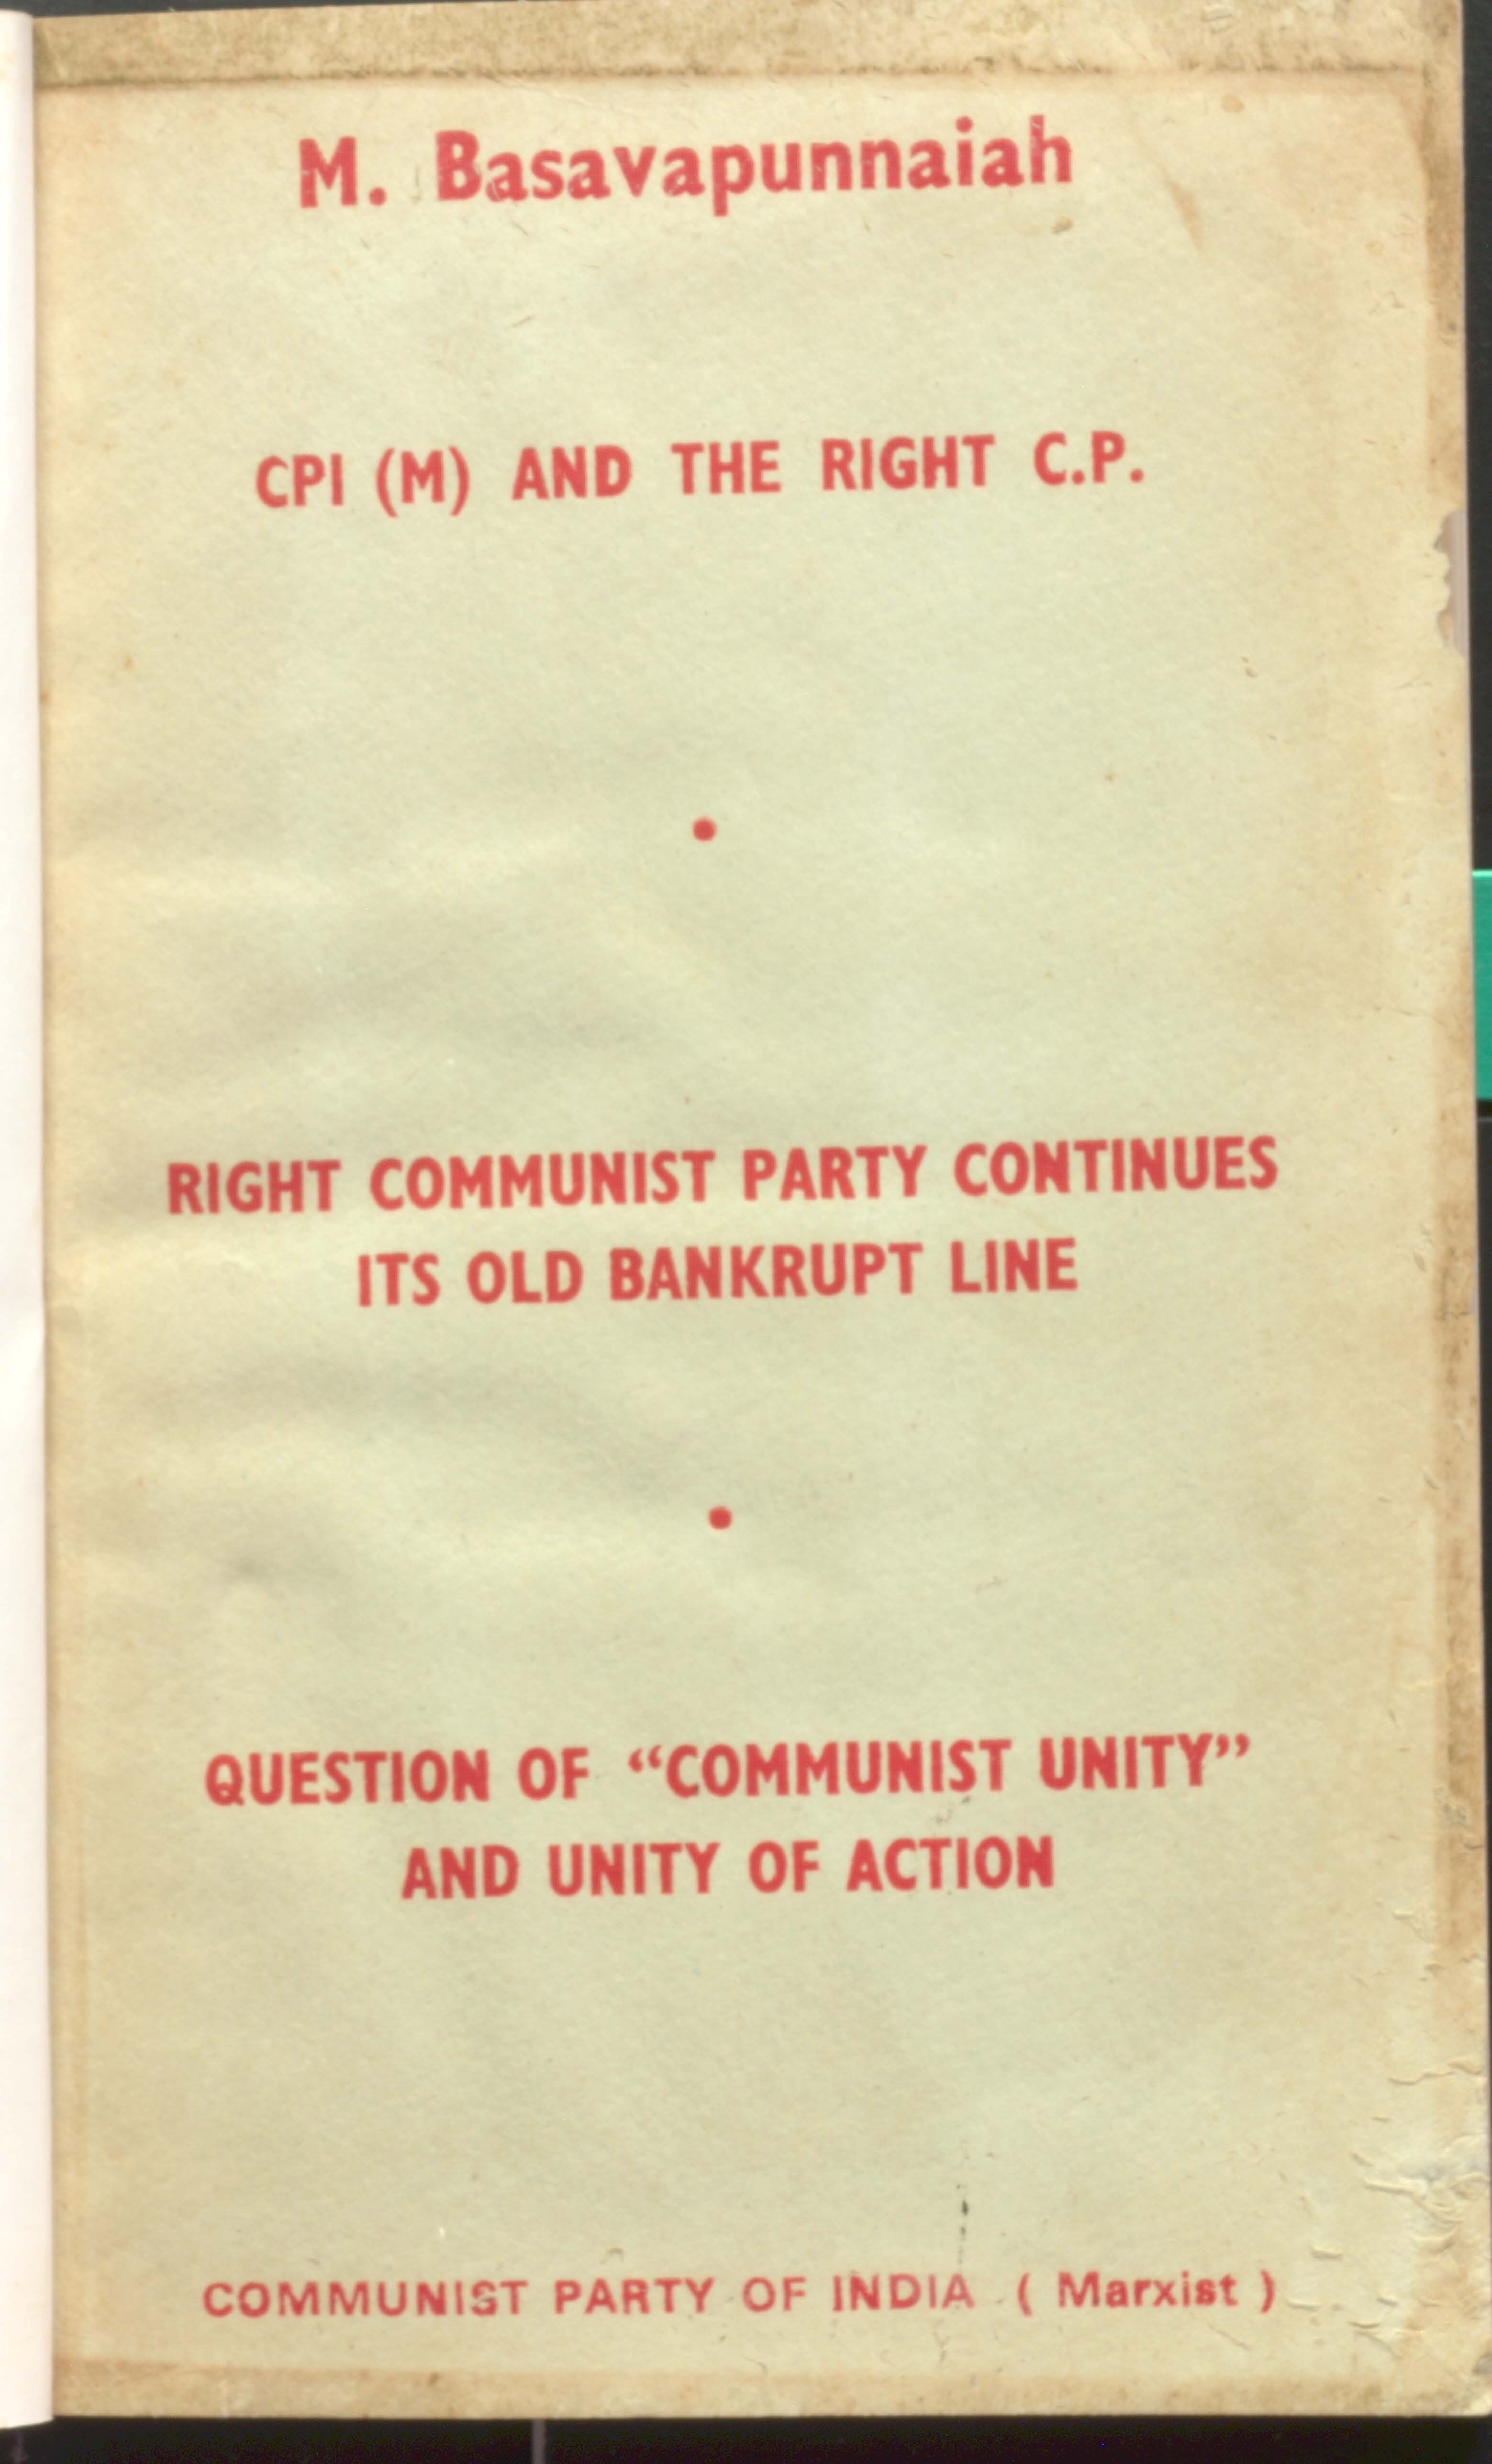 Cpi (m) And The Right C.P(Right Communist Party Continues it's Old Bankrupt Line 